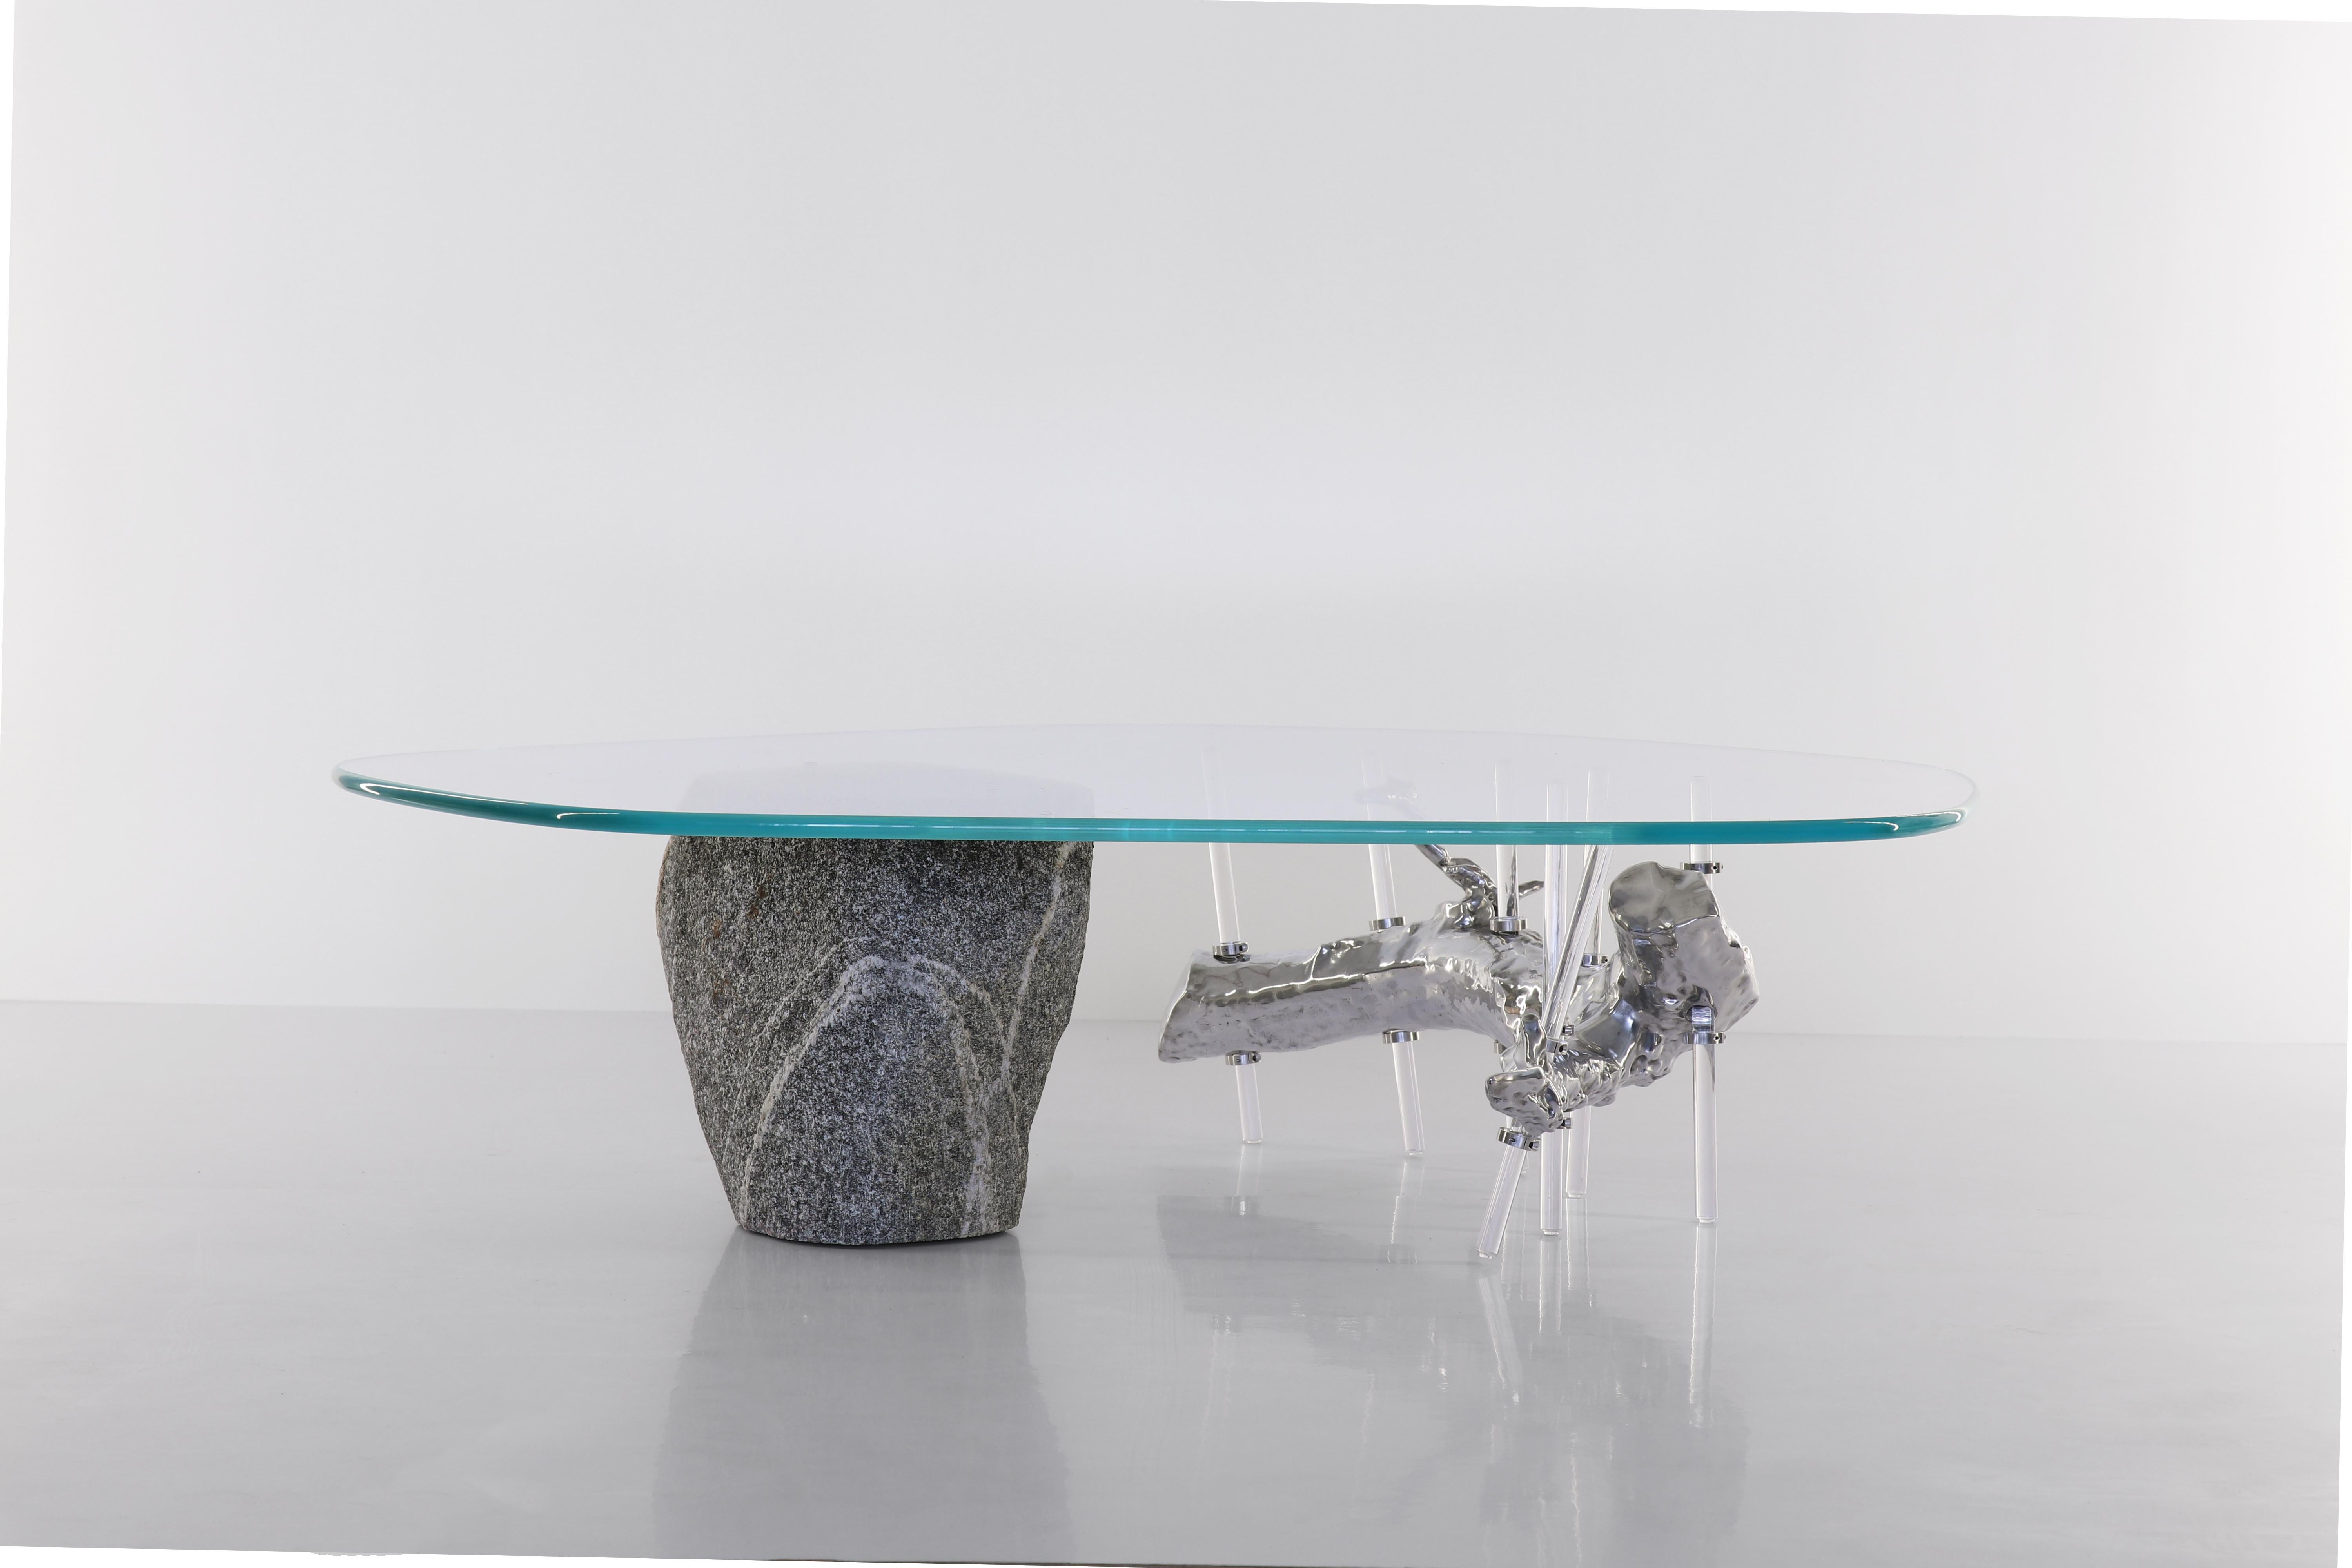 Specimen coffee table by Batten and Kamp
Dimensions: D110 x H30 cm
Materials: Cast aluminium, granite stone, tempered low iron glass.

The coffee table ‘Specimen’ features an aluminium casting of a gnarled branch and a cut and polished granite